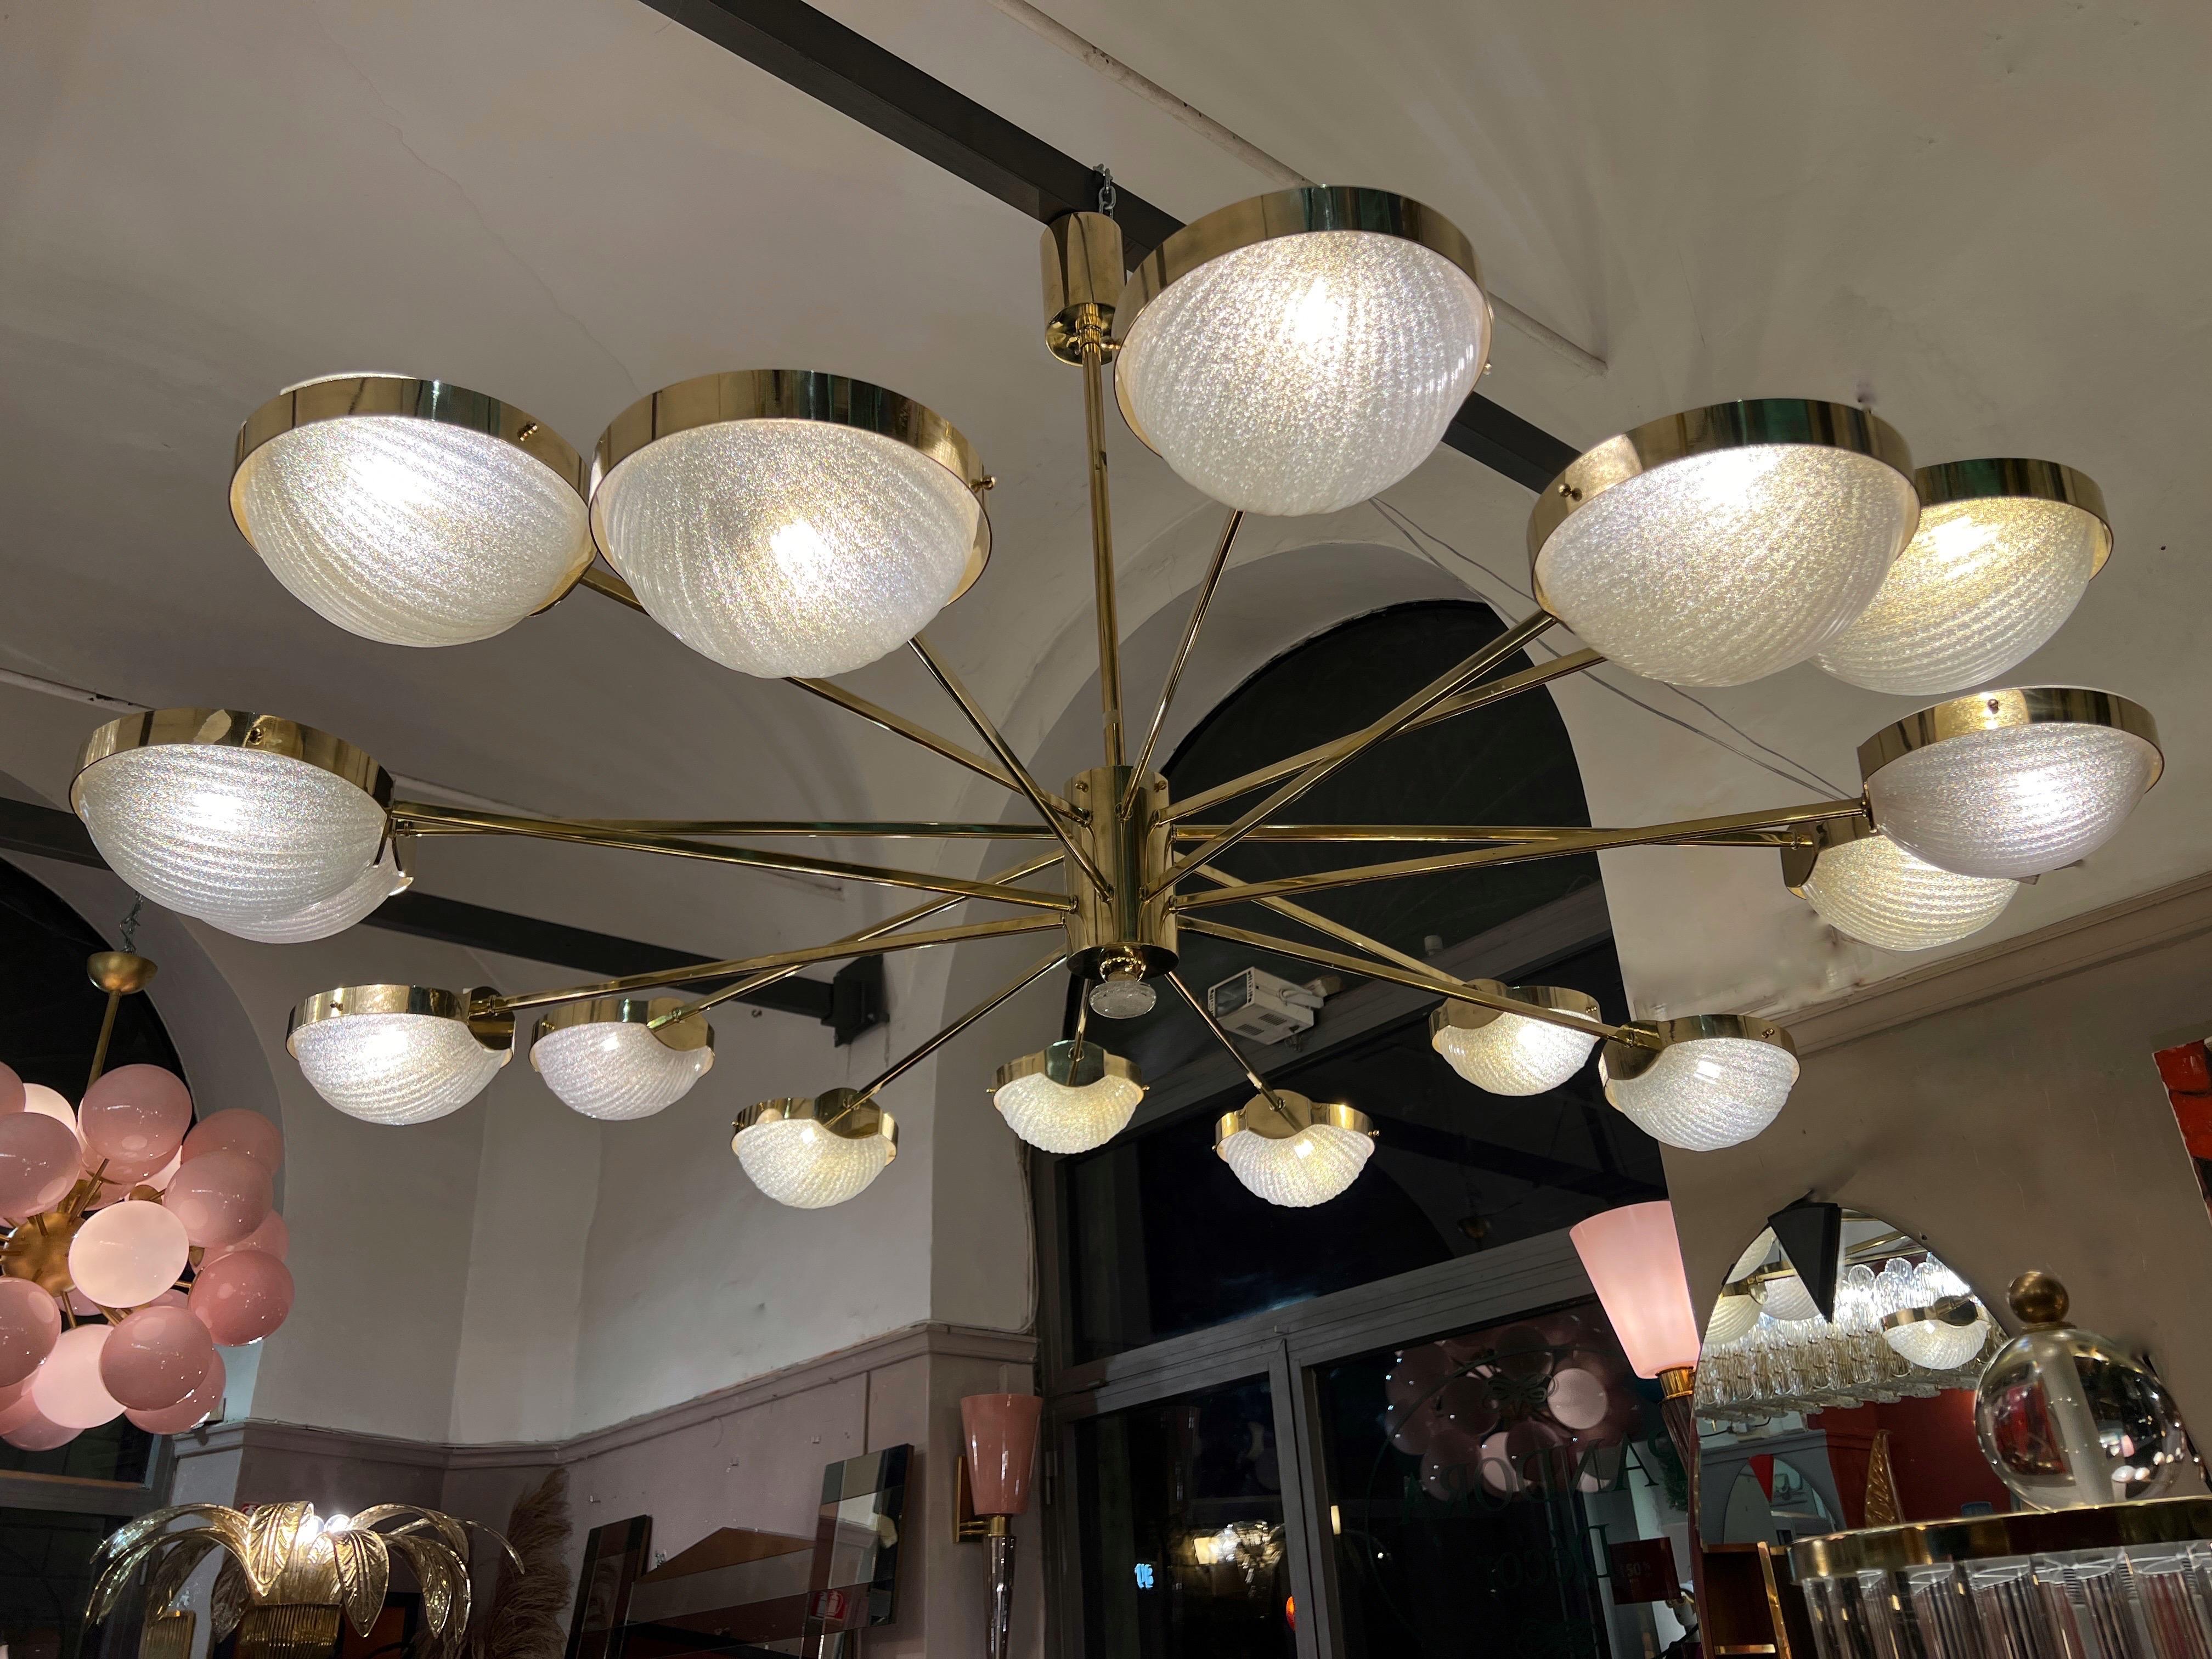 Big Murano Round Clear Glass and Staggered Brass Arms Chandelier.
The vintage glass is  by Vistosi (Murano) has a frosted and ribbed effect.
The chandelier comes with 16 staggered brass arms andand the same number of   corresponding lights.
It can